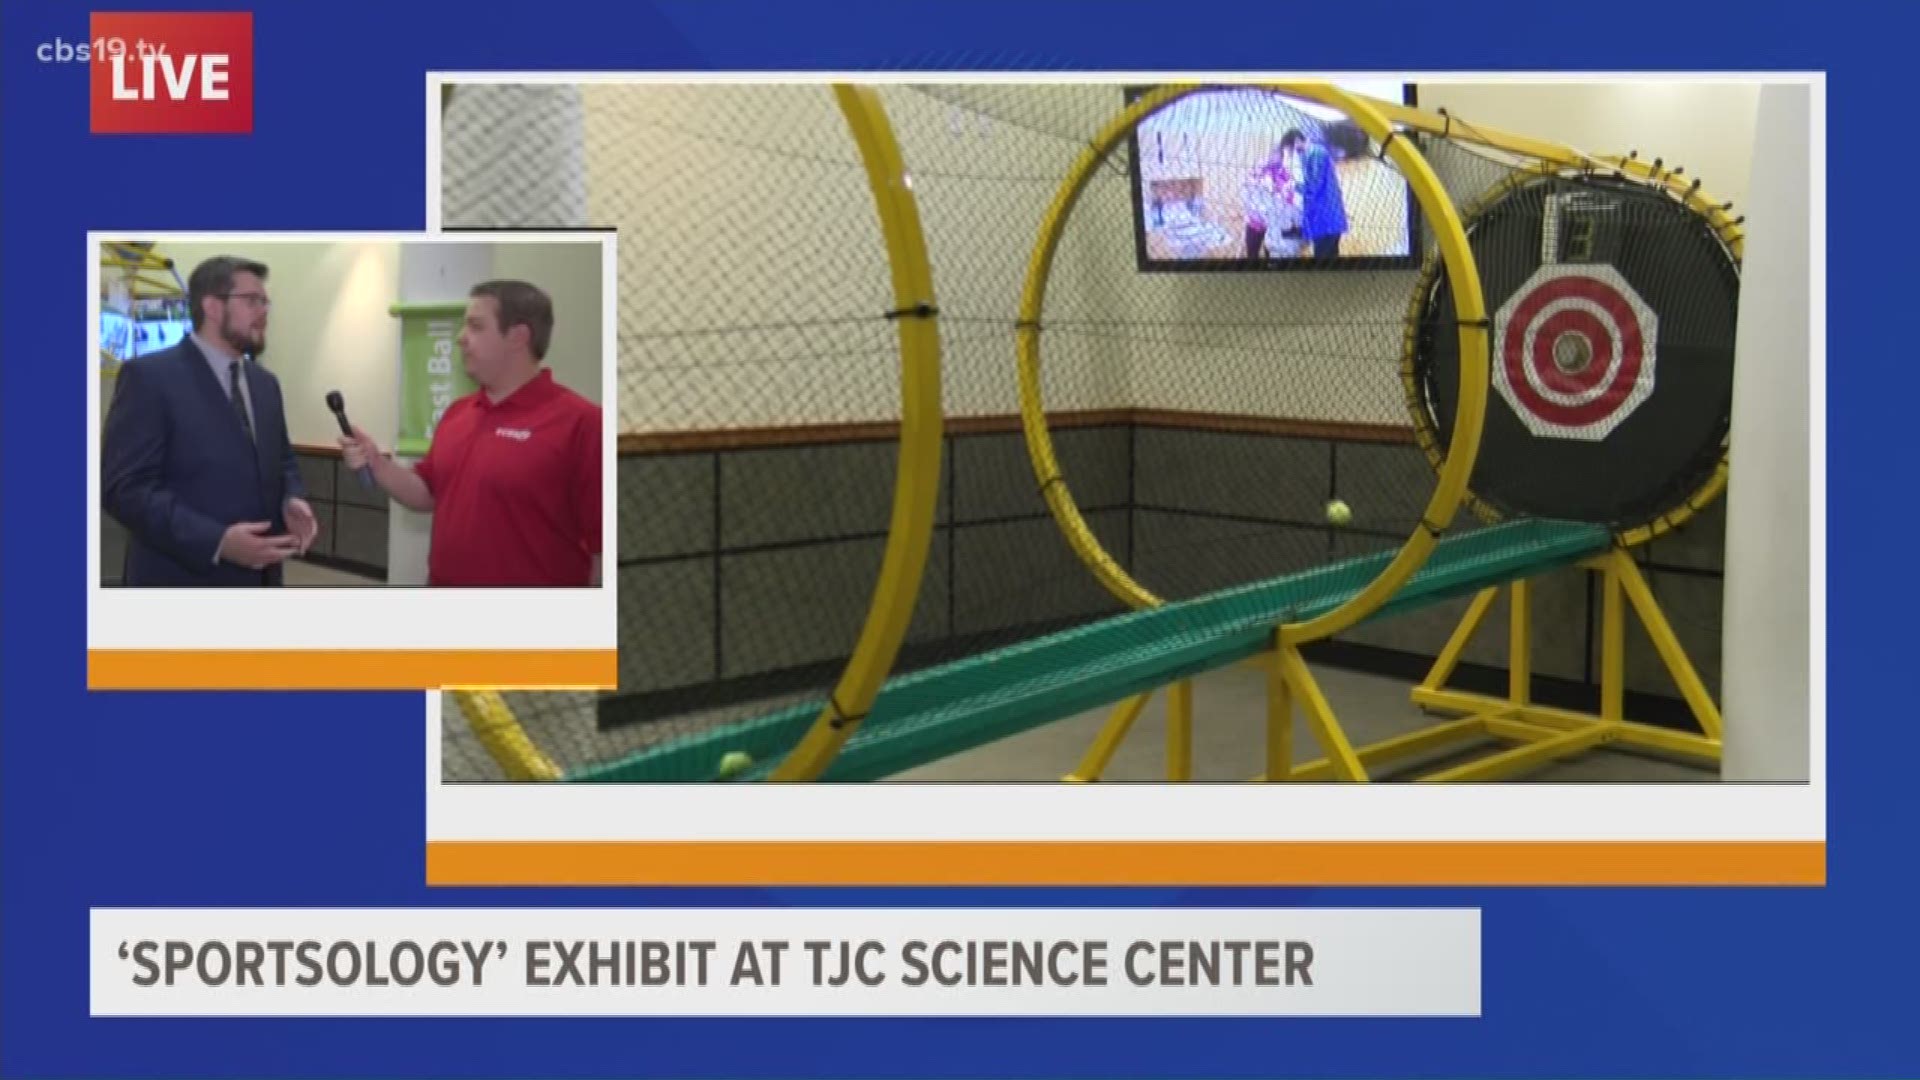 The TJC 'Sportsology' exhibit opens today and Meteorologist Michael Behrens got a first hand look today during The Noon Show! Check it out! 